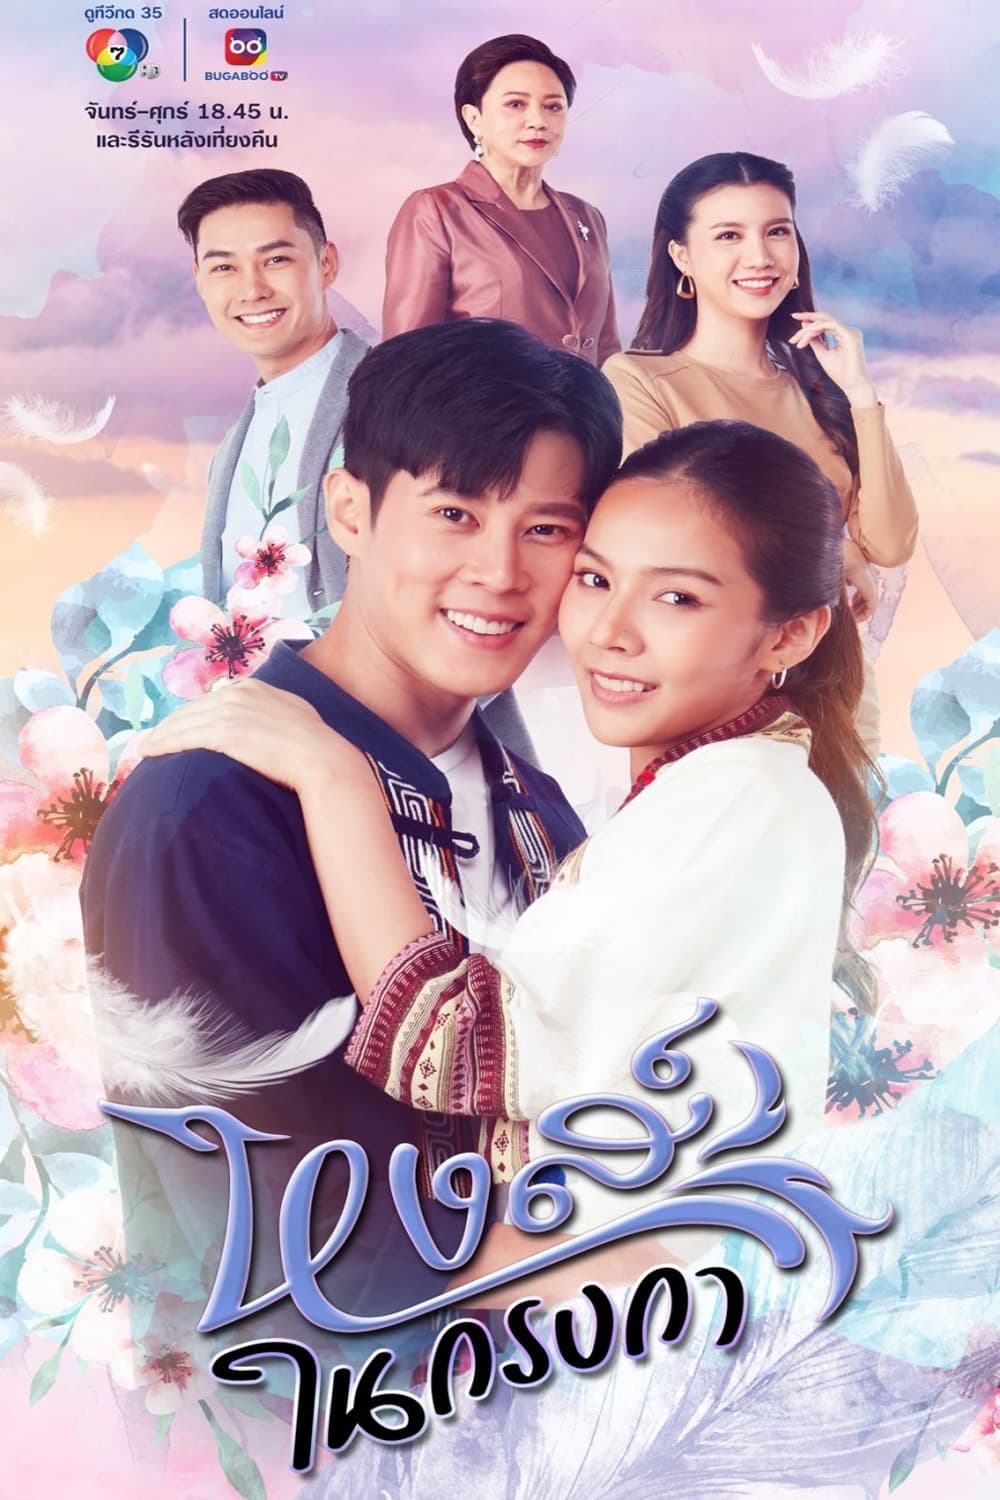 TV ratings for Lucky Swan (หงส์ในกรงกา) in Filipinas. Channel 7 TV series